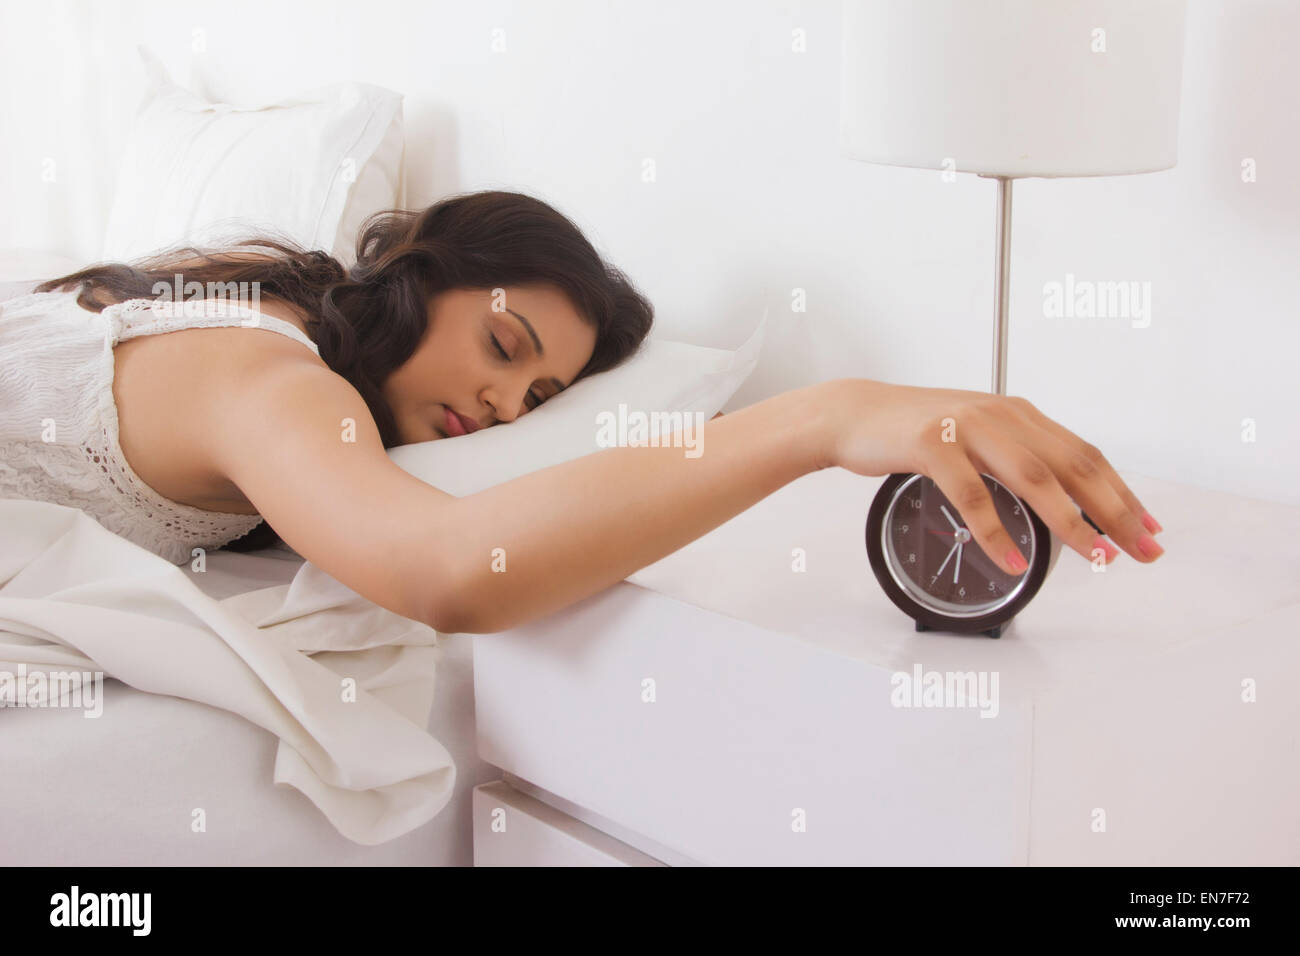 Woman with hand on bedside clock Stock Photo